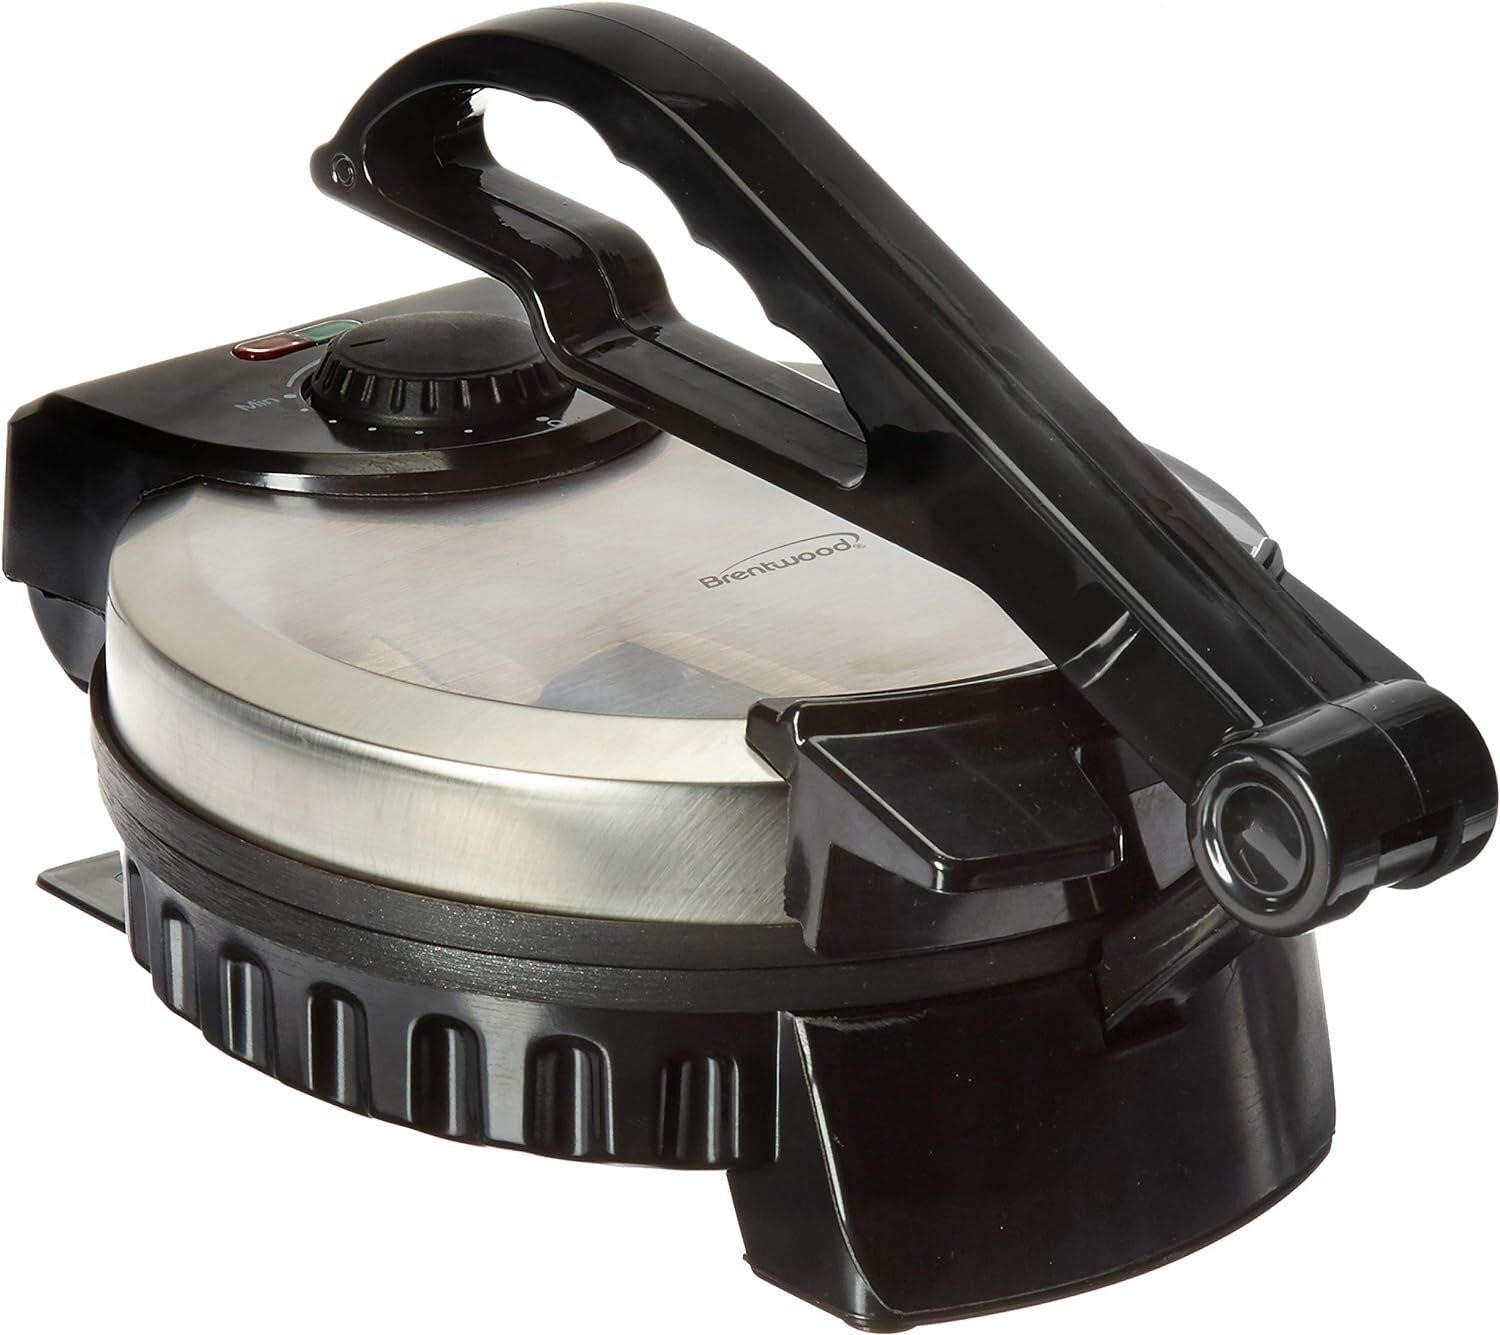 Brentwood 8-Inch Non-Stick Electric Tortilla Maker